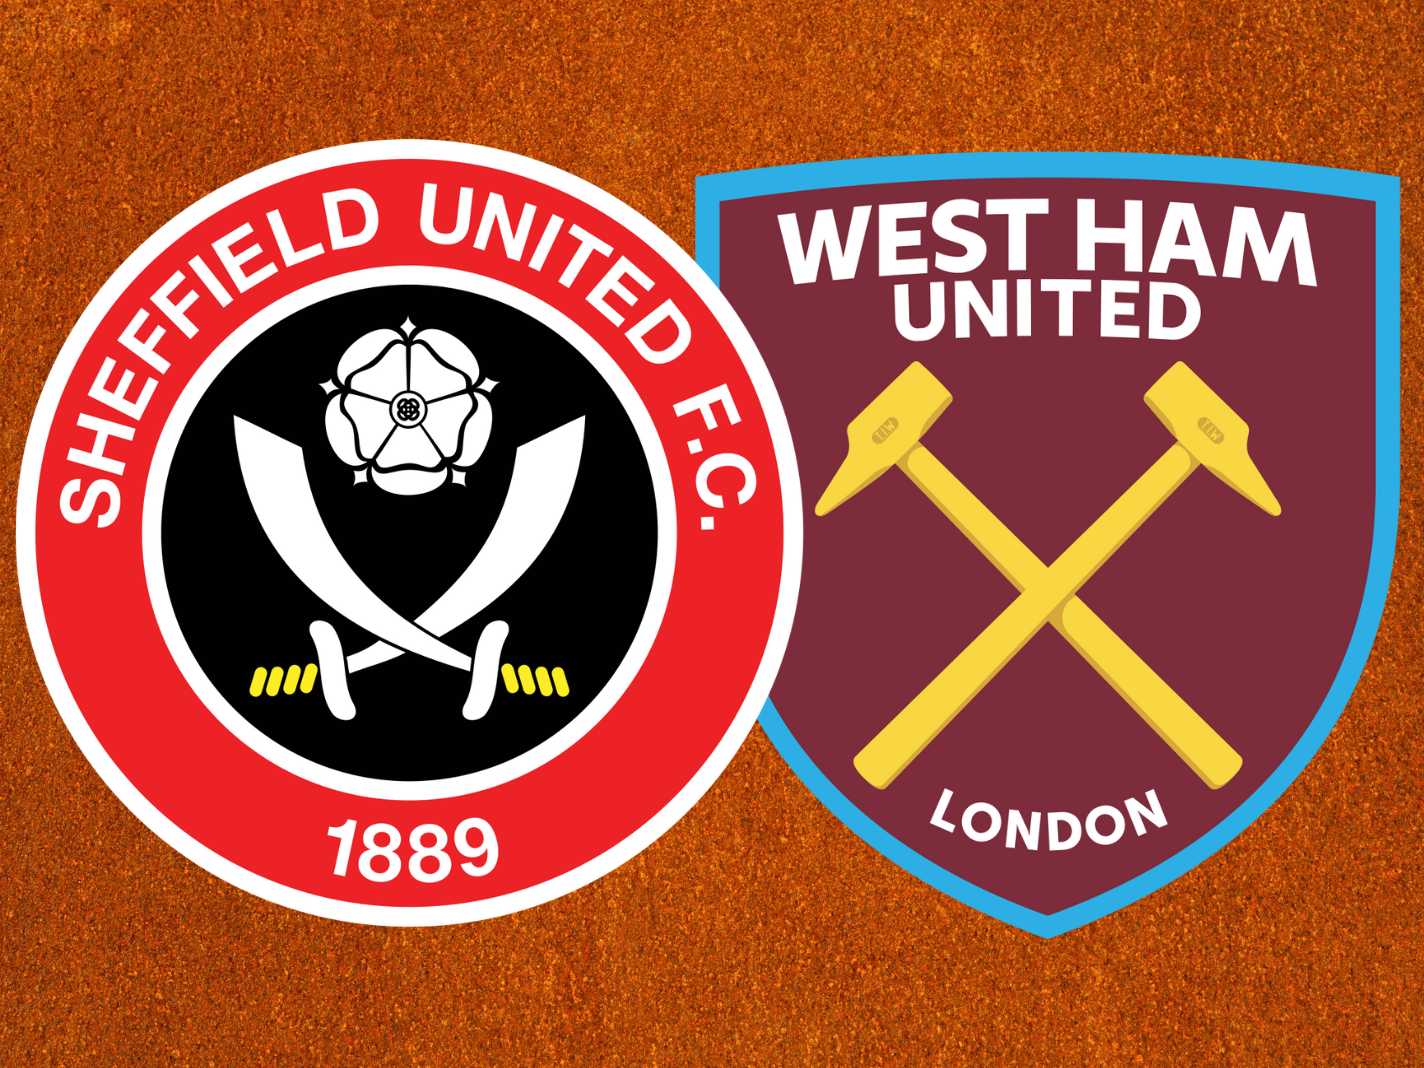 Ultimate Betting Tips for Sheffield United vs West Ham: Analyzing Form and Key Stats